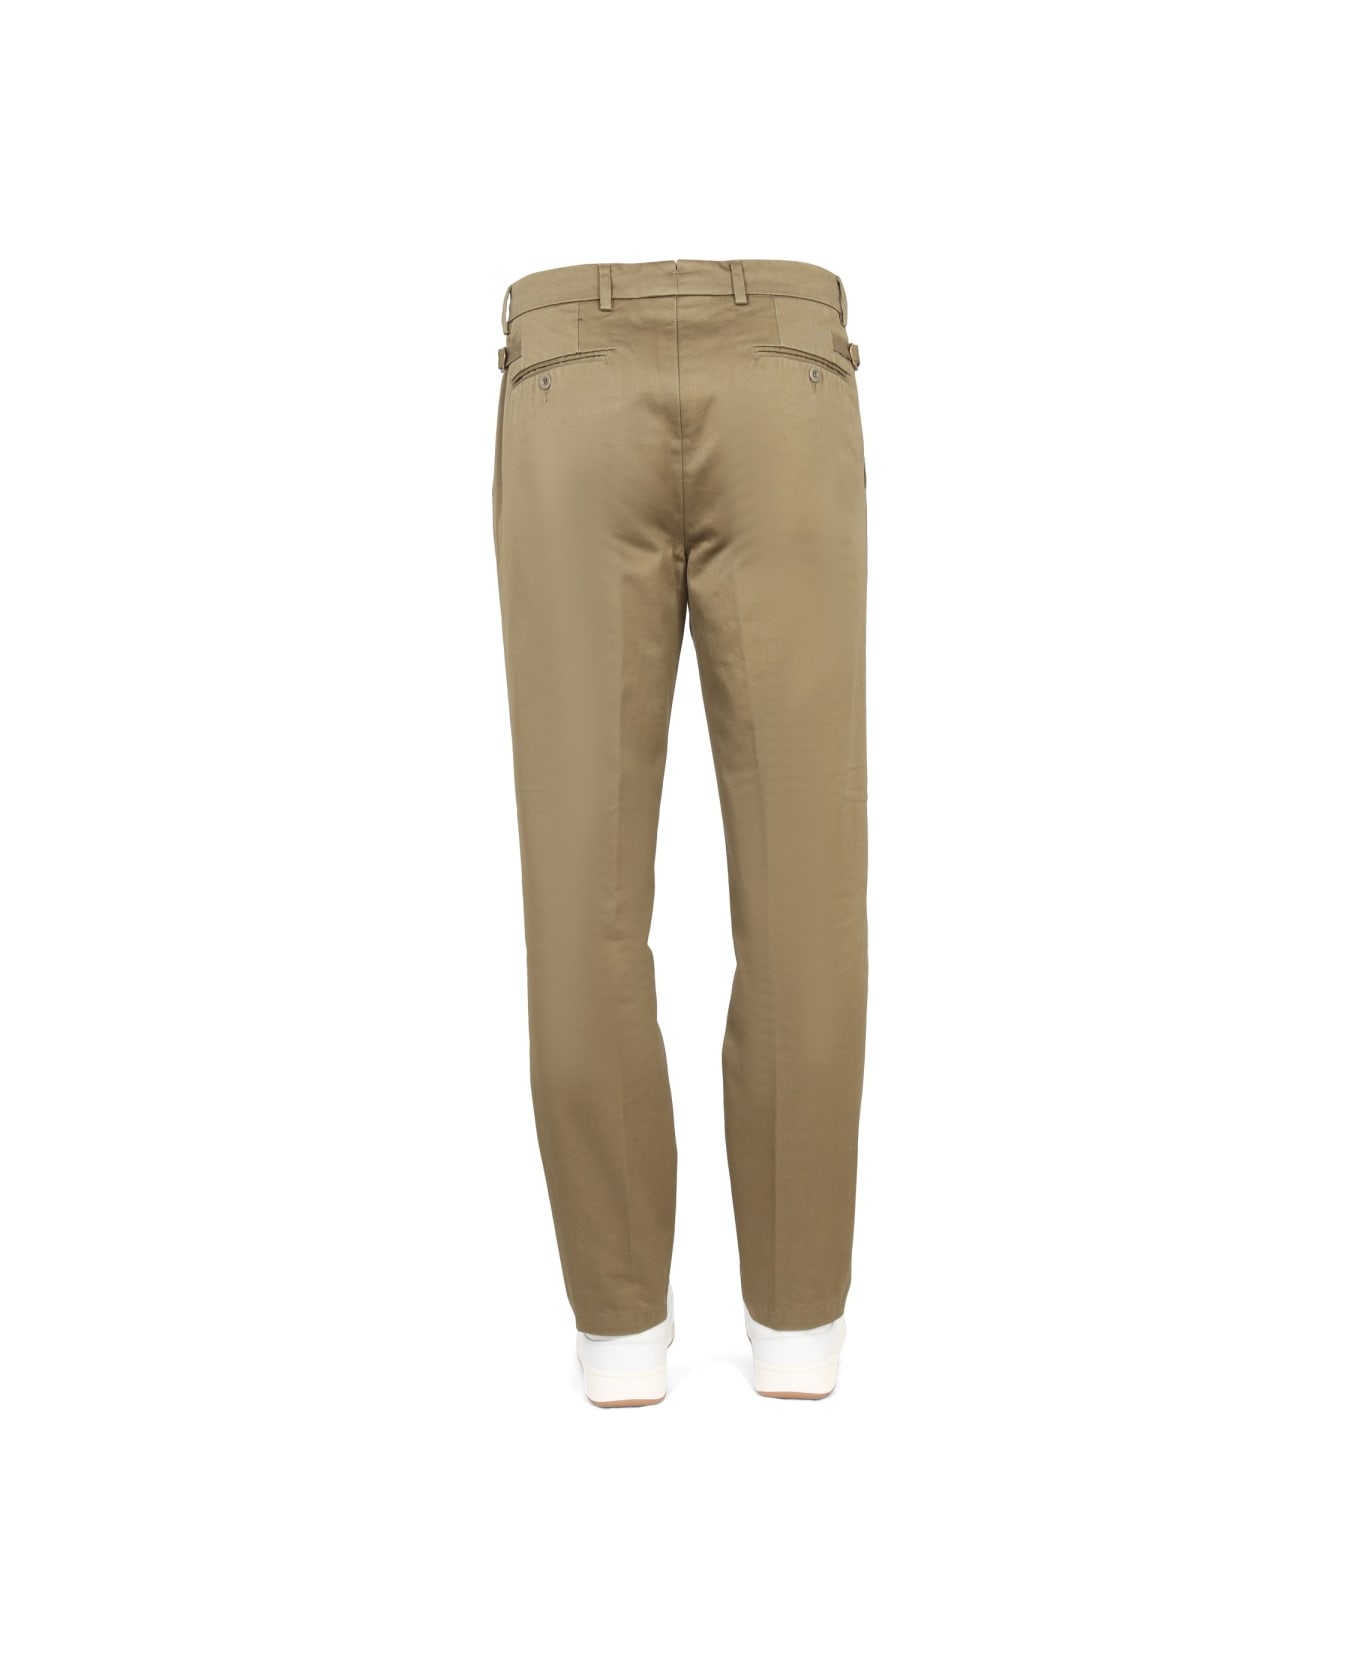 East Harbour Surplus Chino Pants - MILITARY GREEN